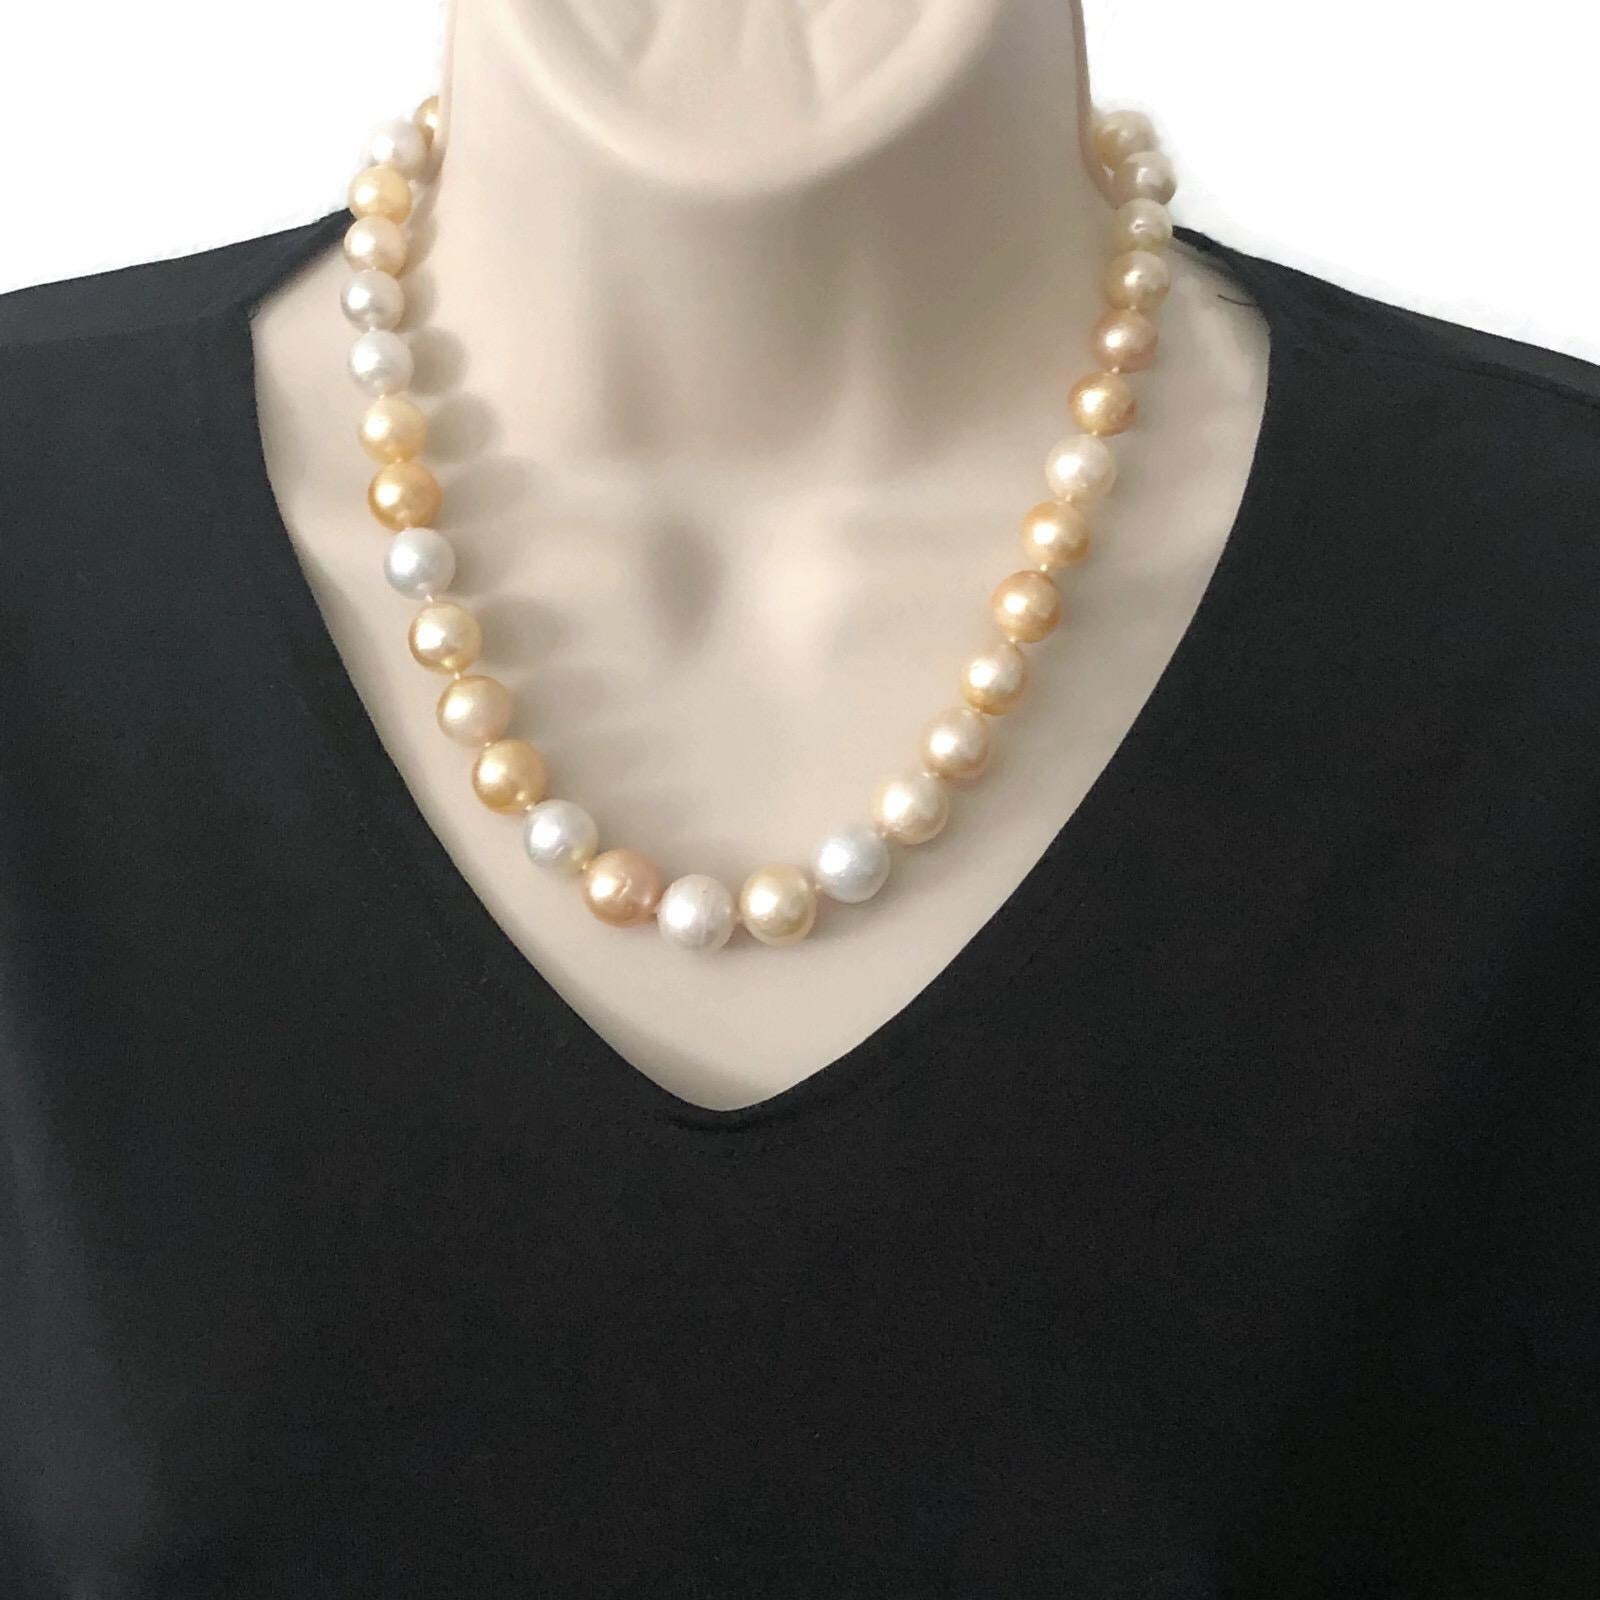 Golden and White South Sea Pearl Necklace with a 14 Karat Gold Diamond Clasp For Sale 2